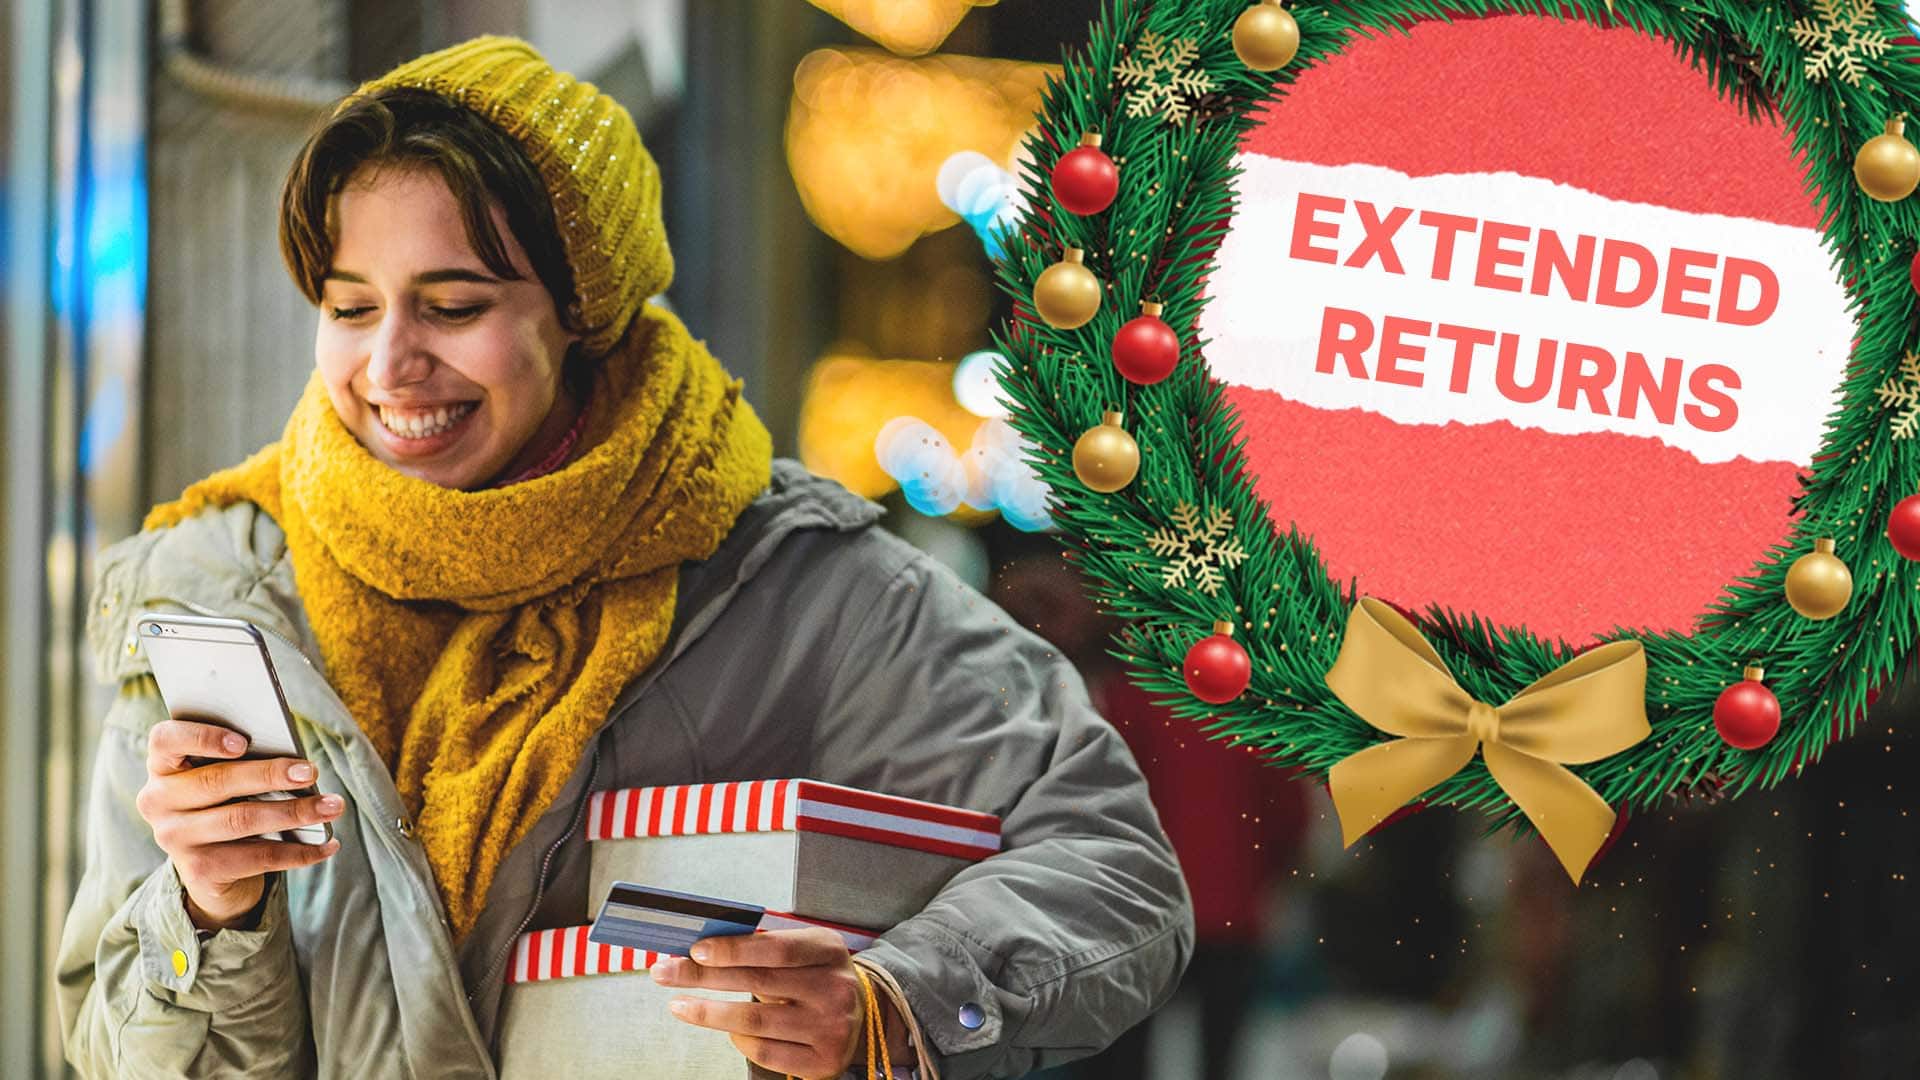 Major retailers extend return windows. Woman shopping at outdoor mall and also making a purchase on her phone. Wreath with text saying "extended returns"